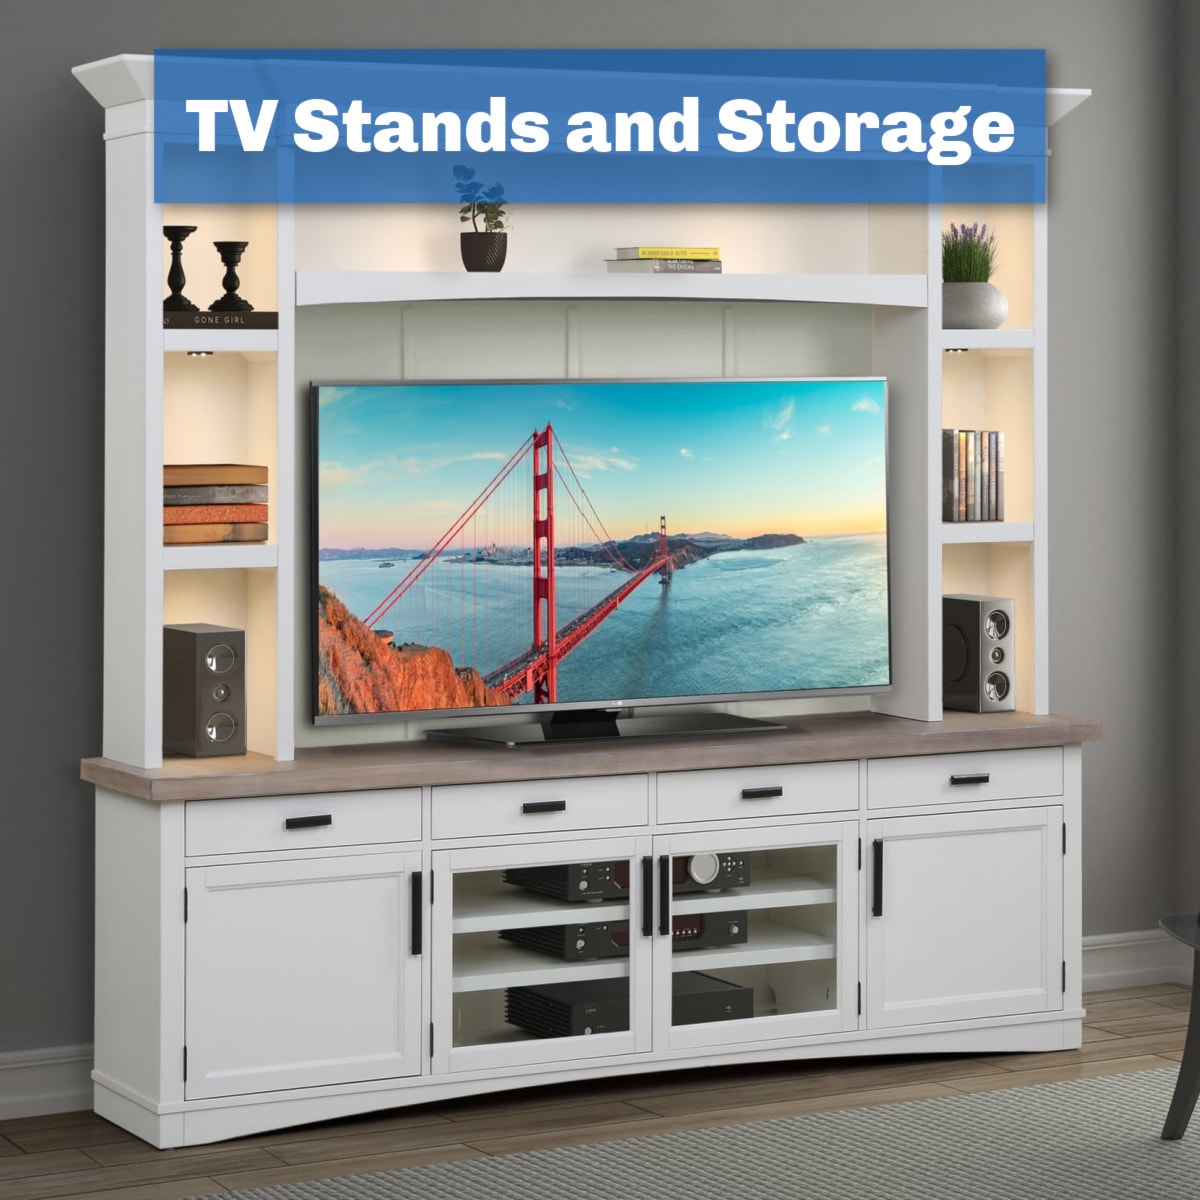 tv stands and storage image